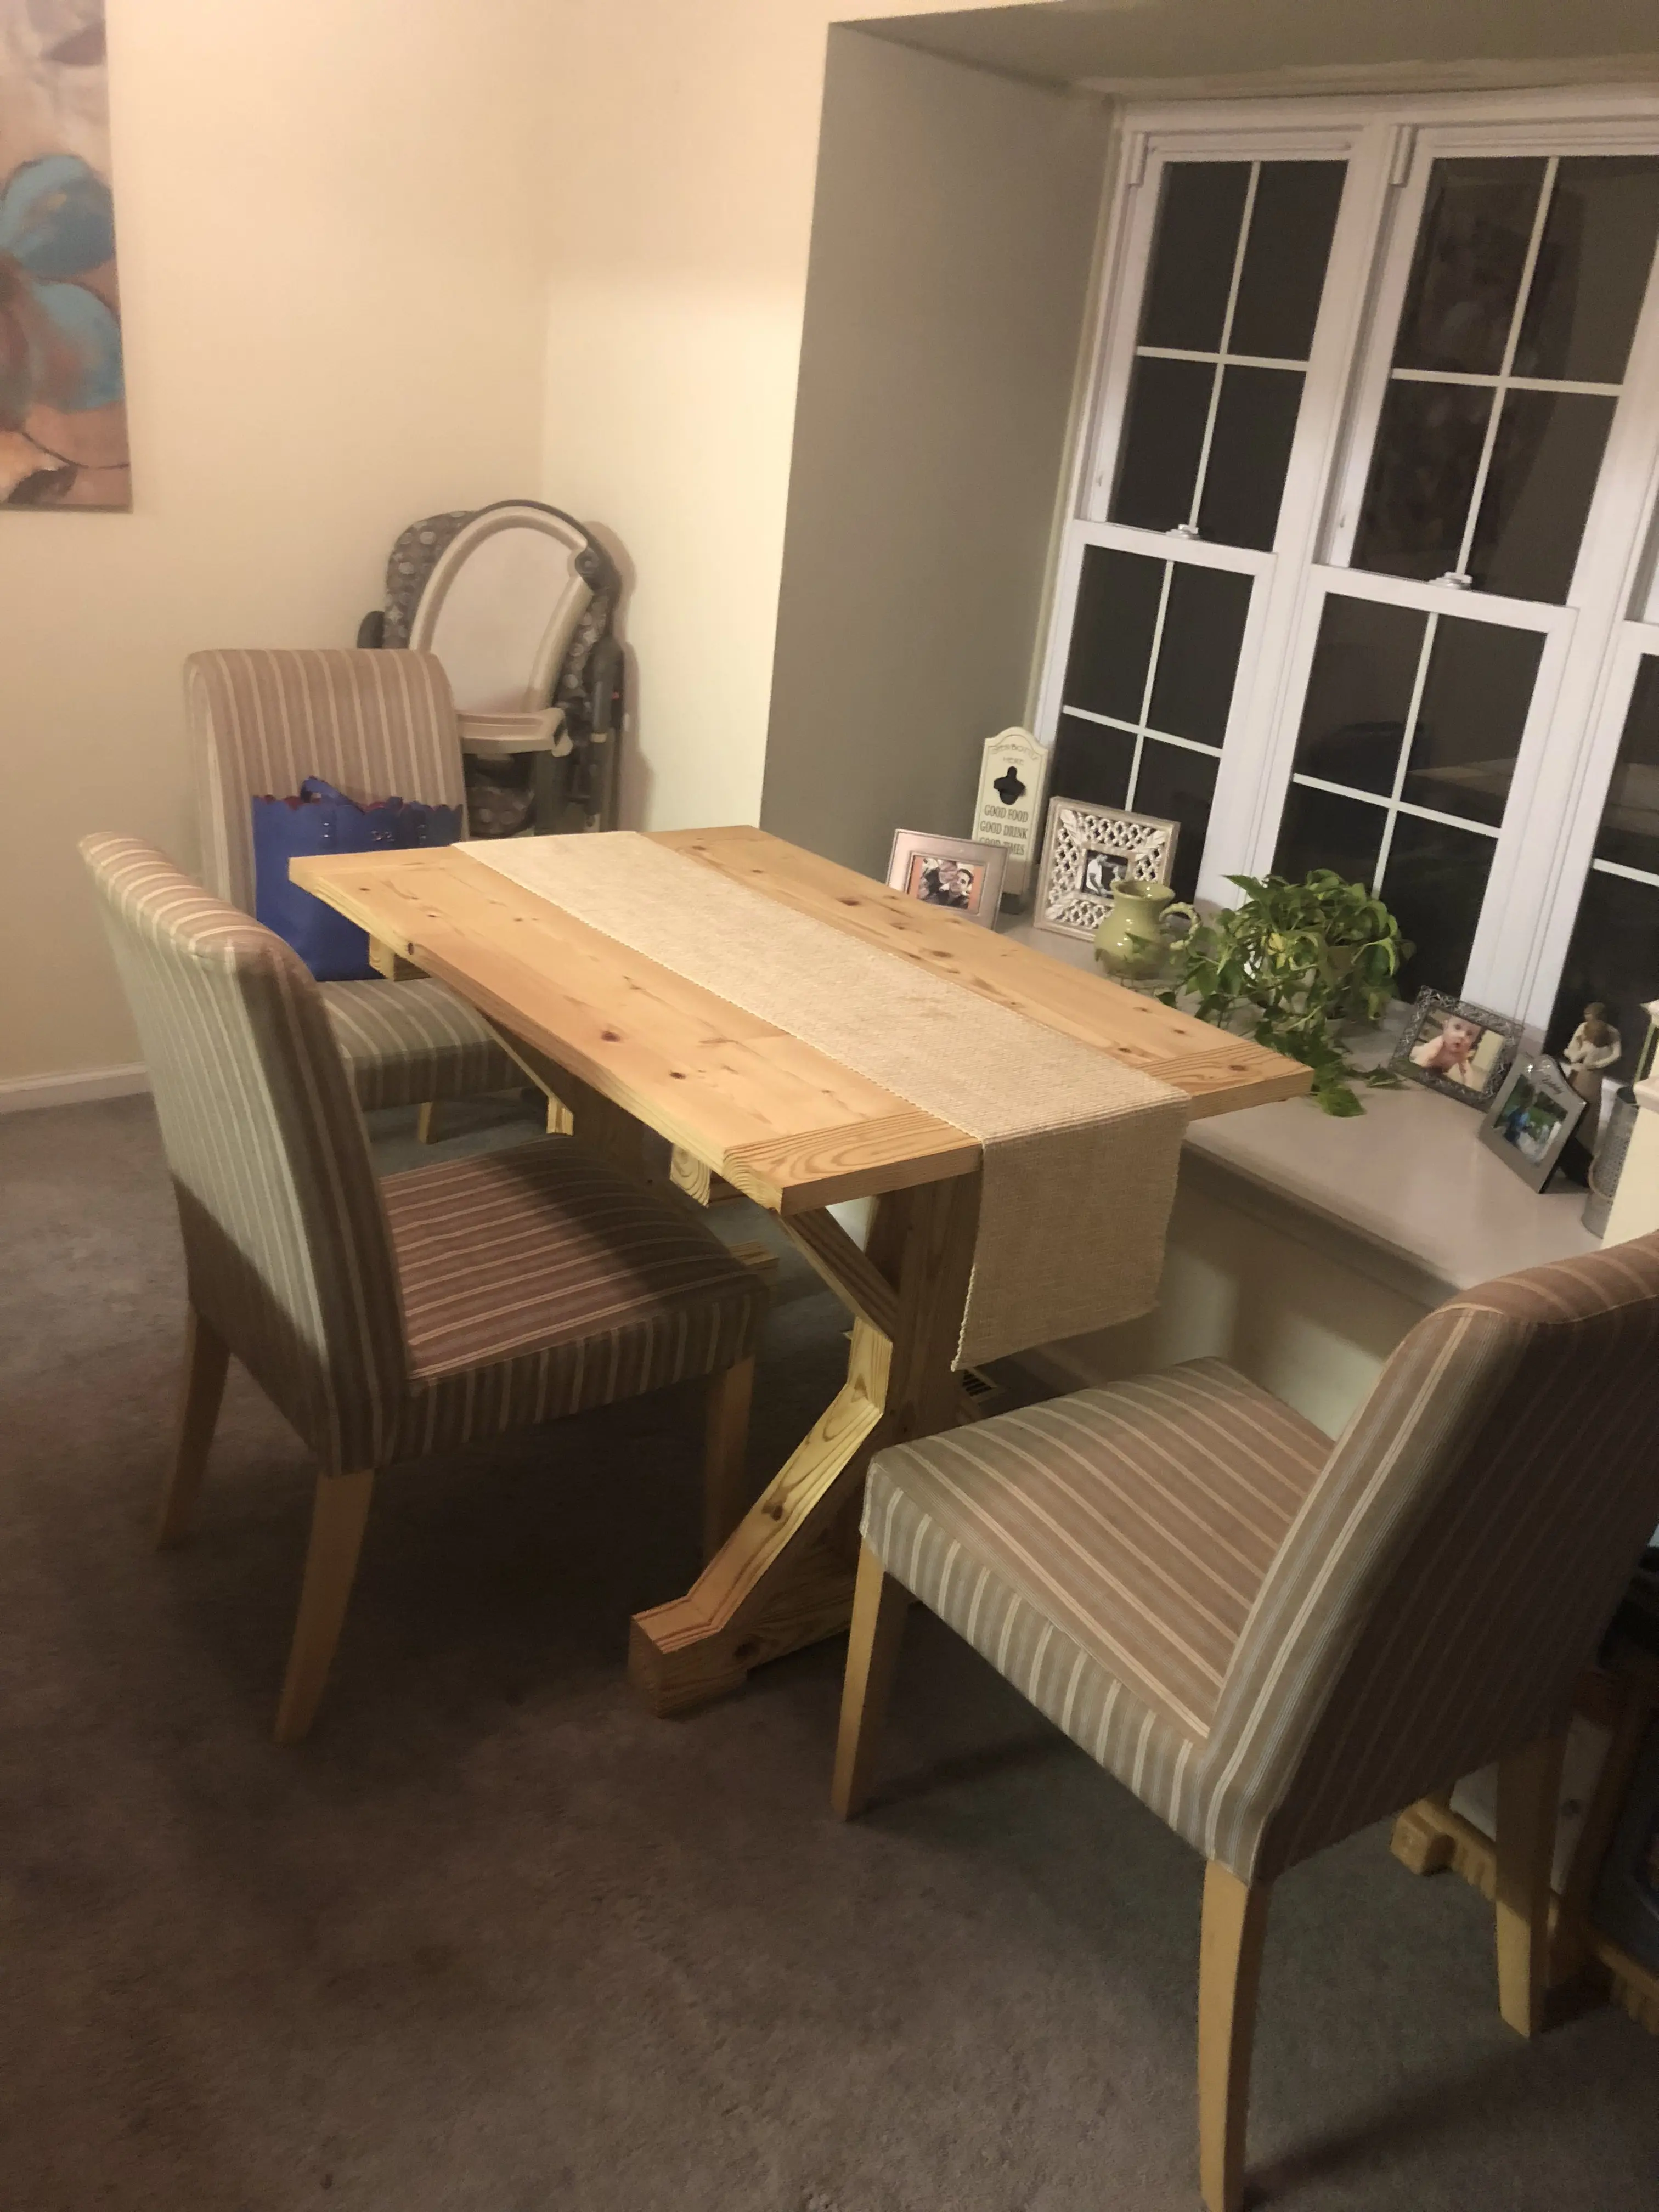 Finished wooden table set up in a dining room.